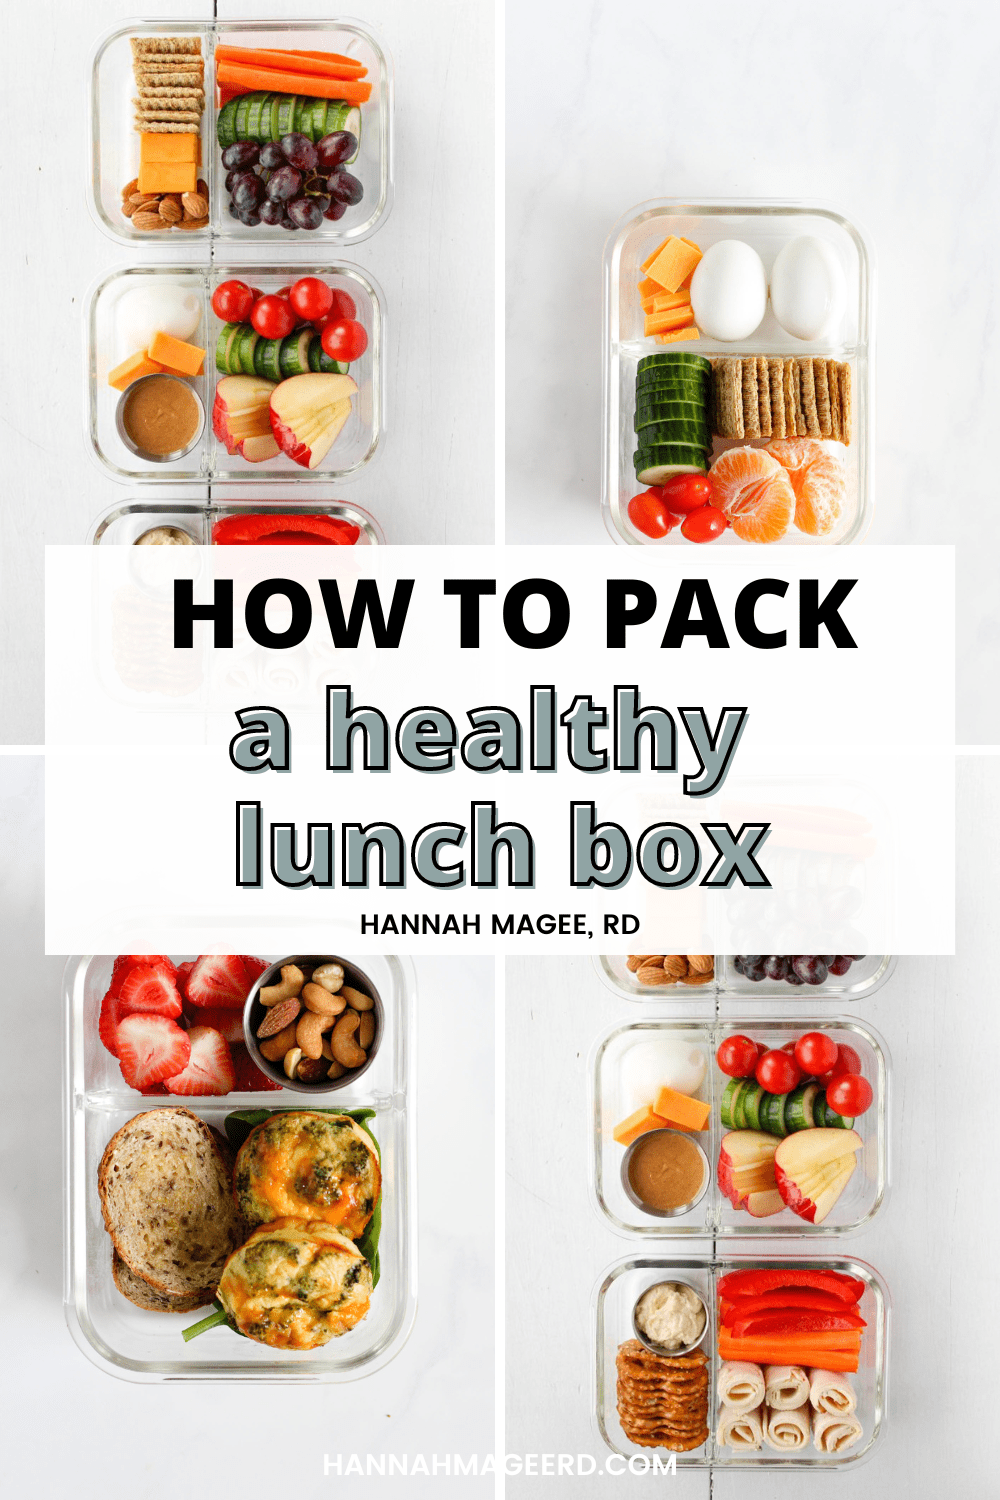 How to Pack a Healthy Lunch Box - Hannah Magee RD